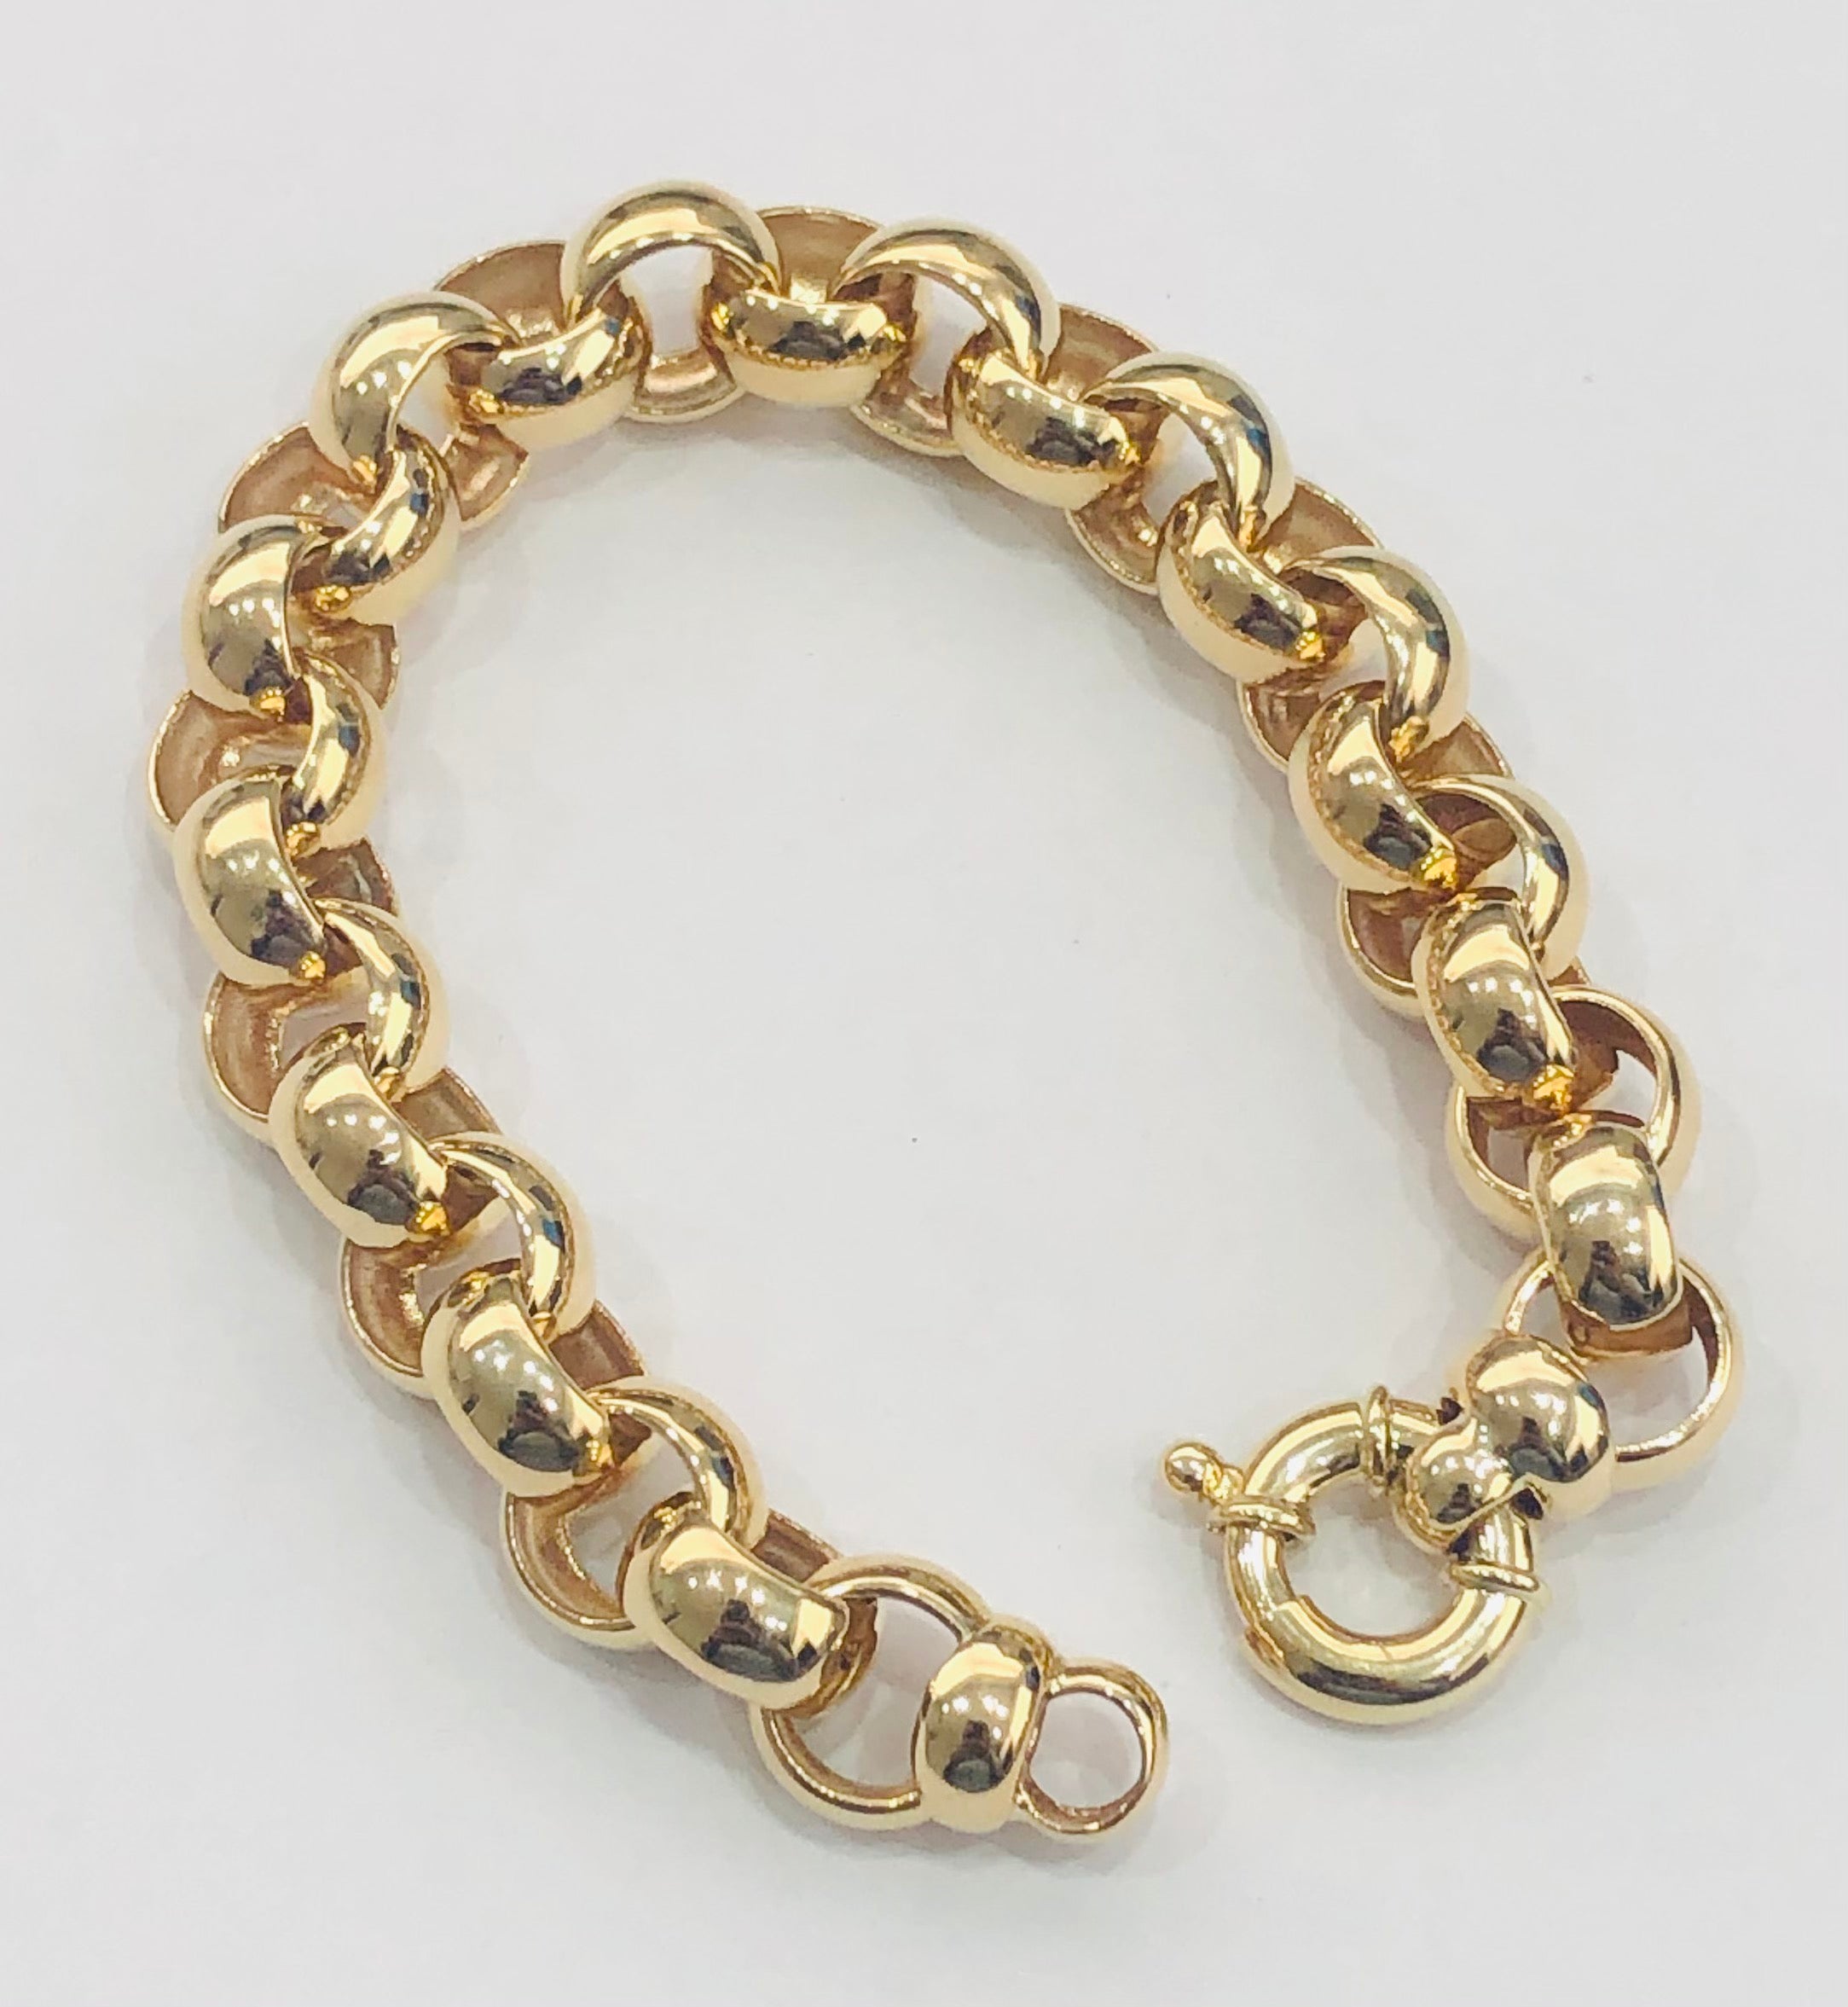 Buy Genuine SOLID 9K 9ct YELLOW GOLD Oval Belcher Bracelet With Filigree  Heart Padlock Clasp 19.5 Cm Online in India - Etsy